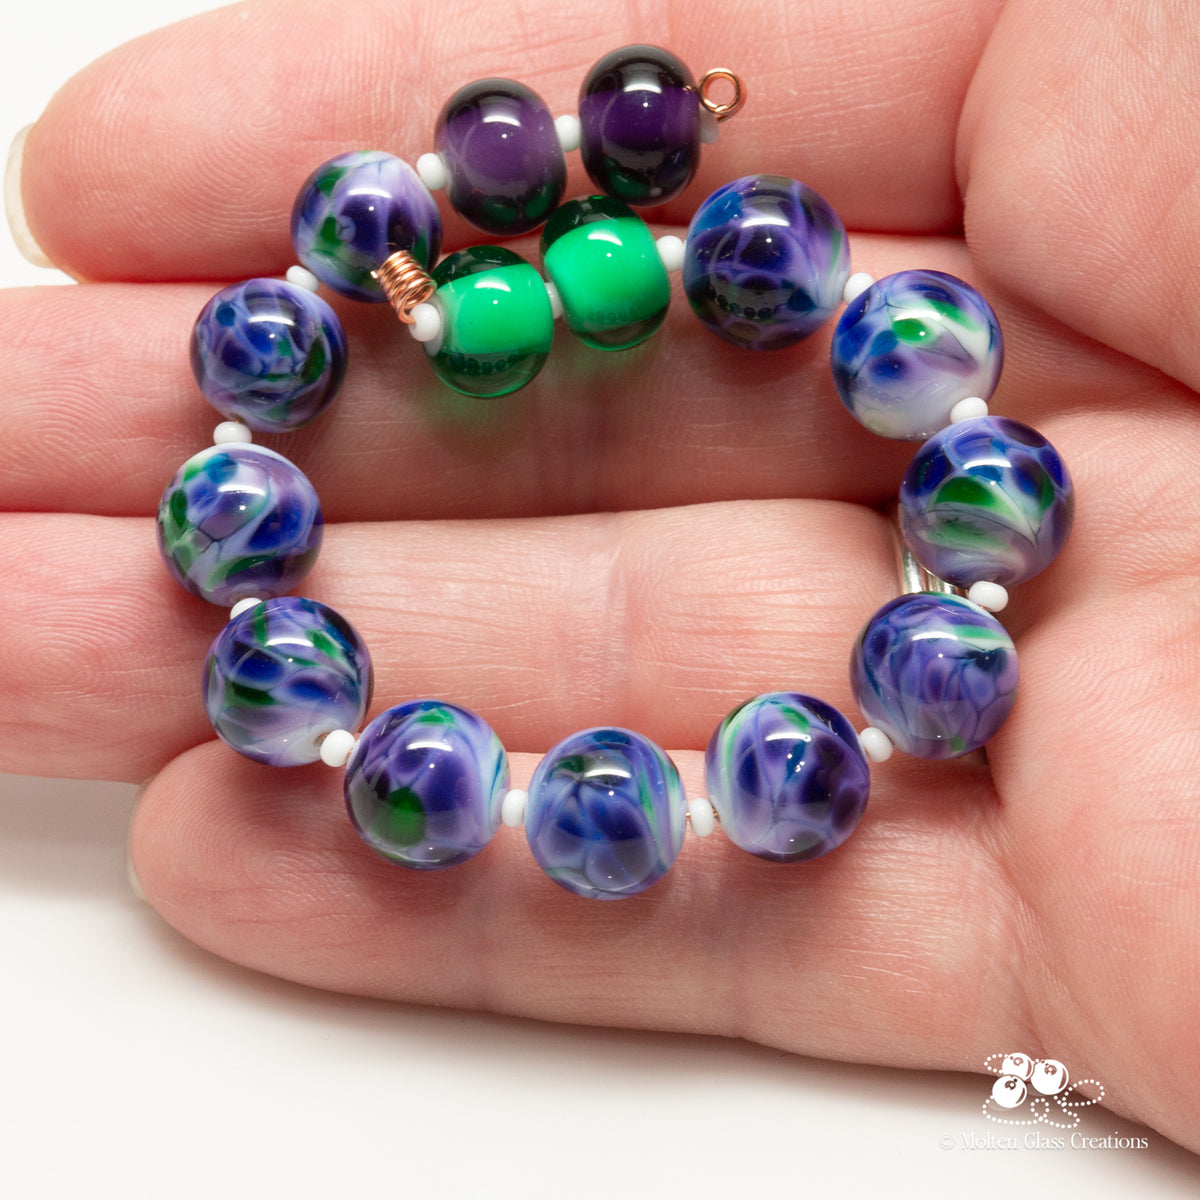 glass bead set consisting of purple, green and white